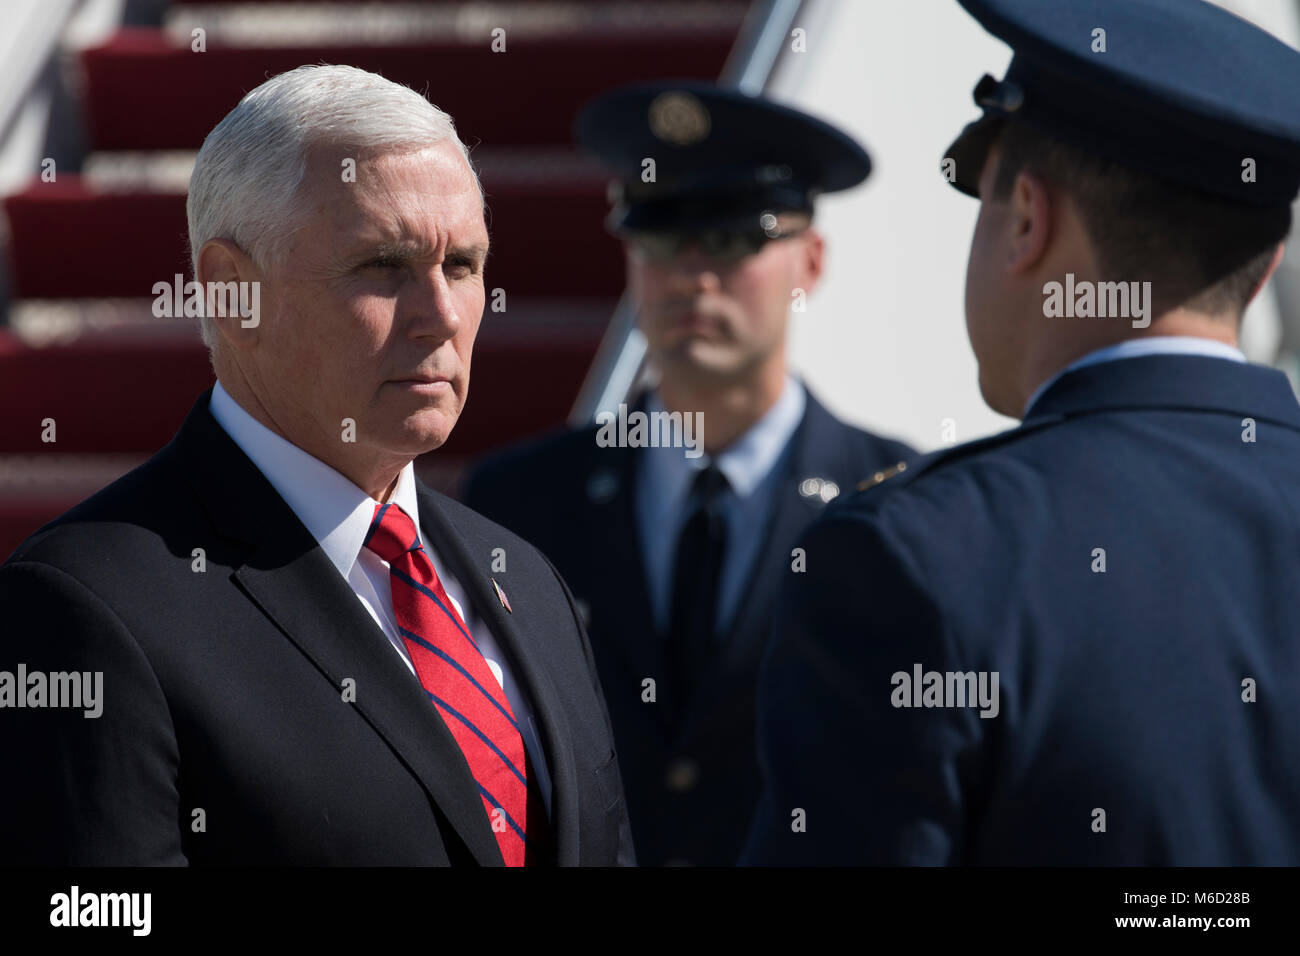 Vice President Mike Pence stops to speak with Maj. Matthew Distefano before boarding Air Force Two on Joint Base Andrews, Md., Feb. 27, 2018. Pence traveled from JBA to Nashville, Tenn. to speak at the National Religious Broadcasters convention. (U.S. Air Force photo/Tech. Sgt. Robert Cloys) Stock Photo